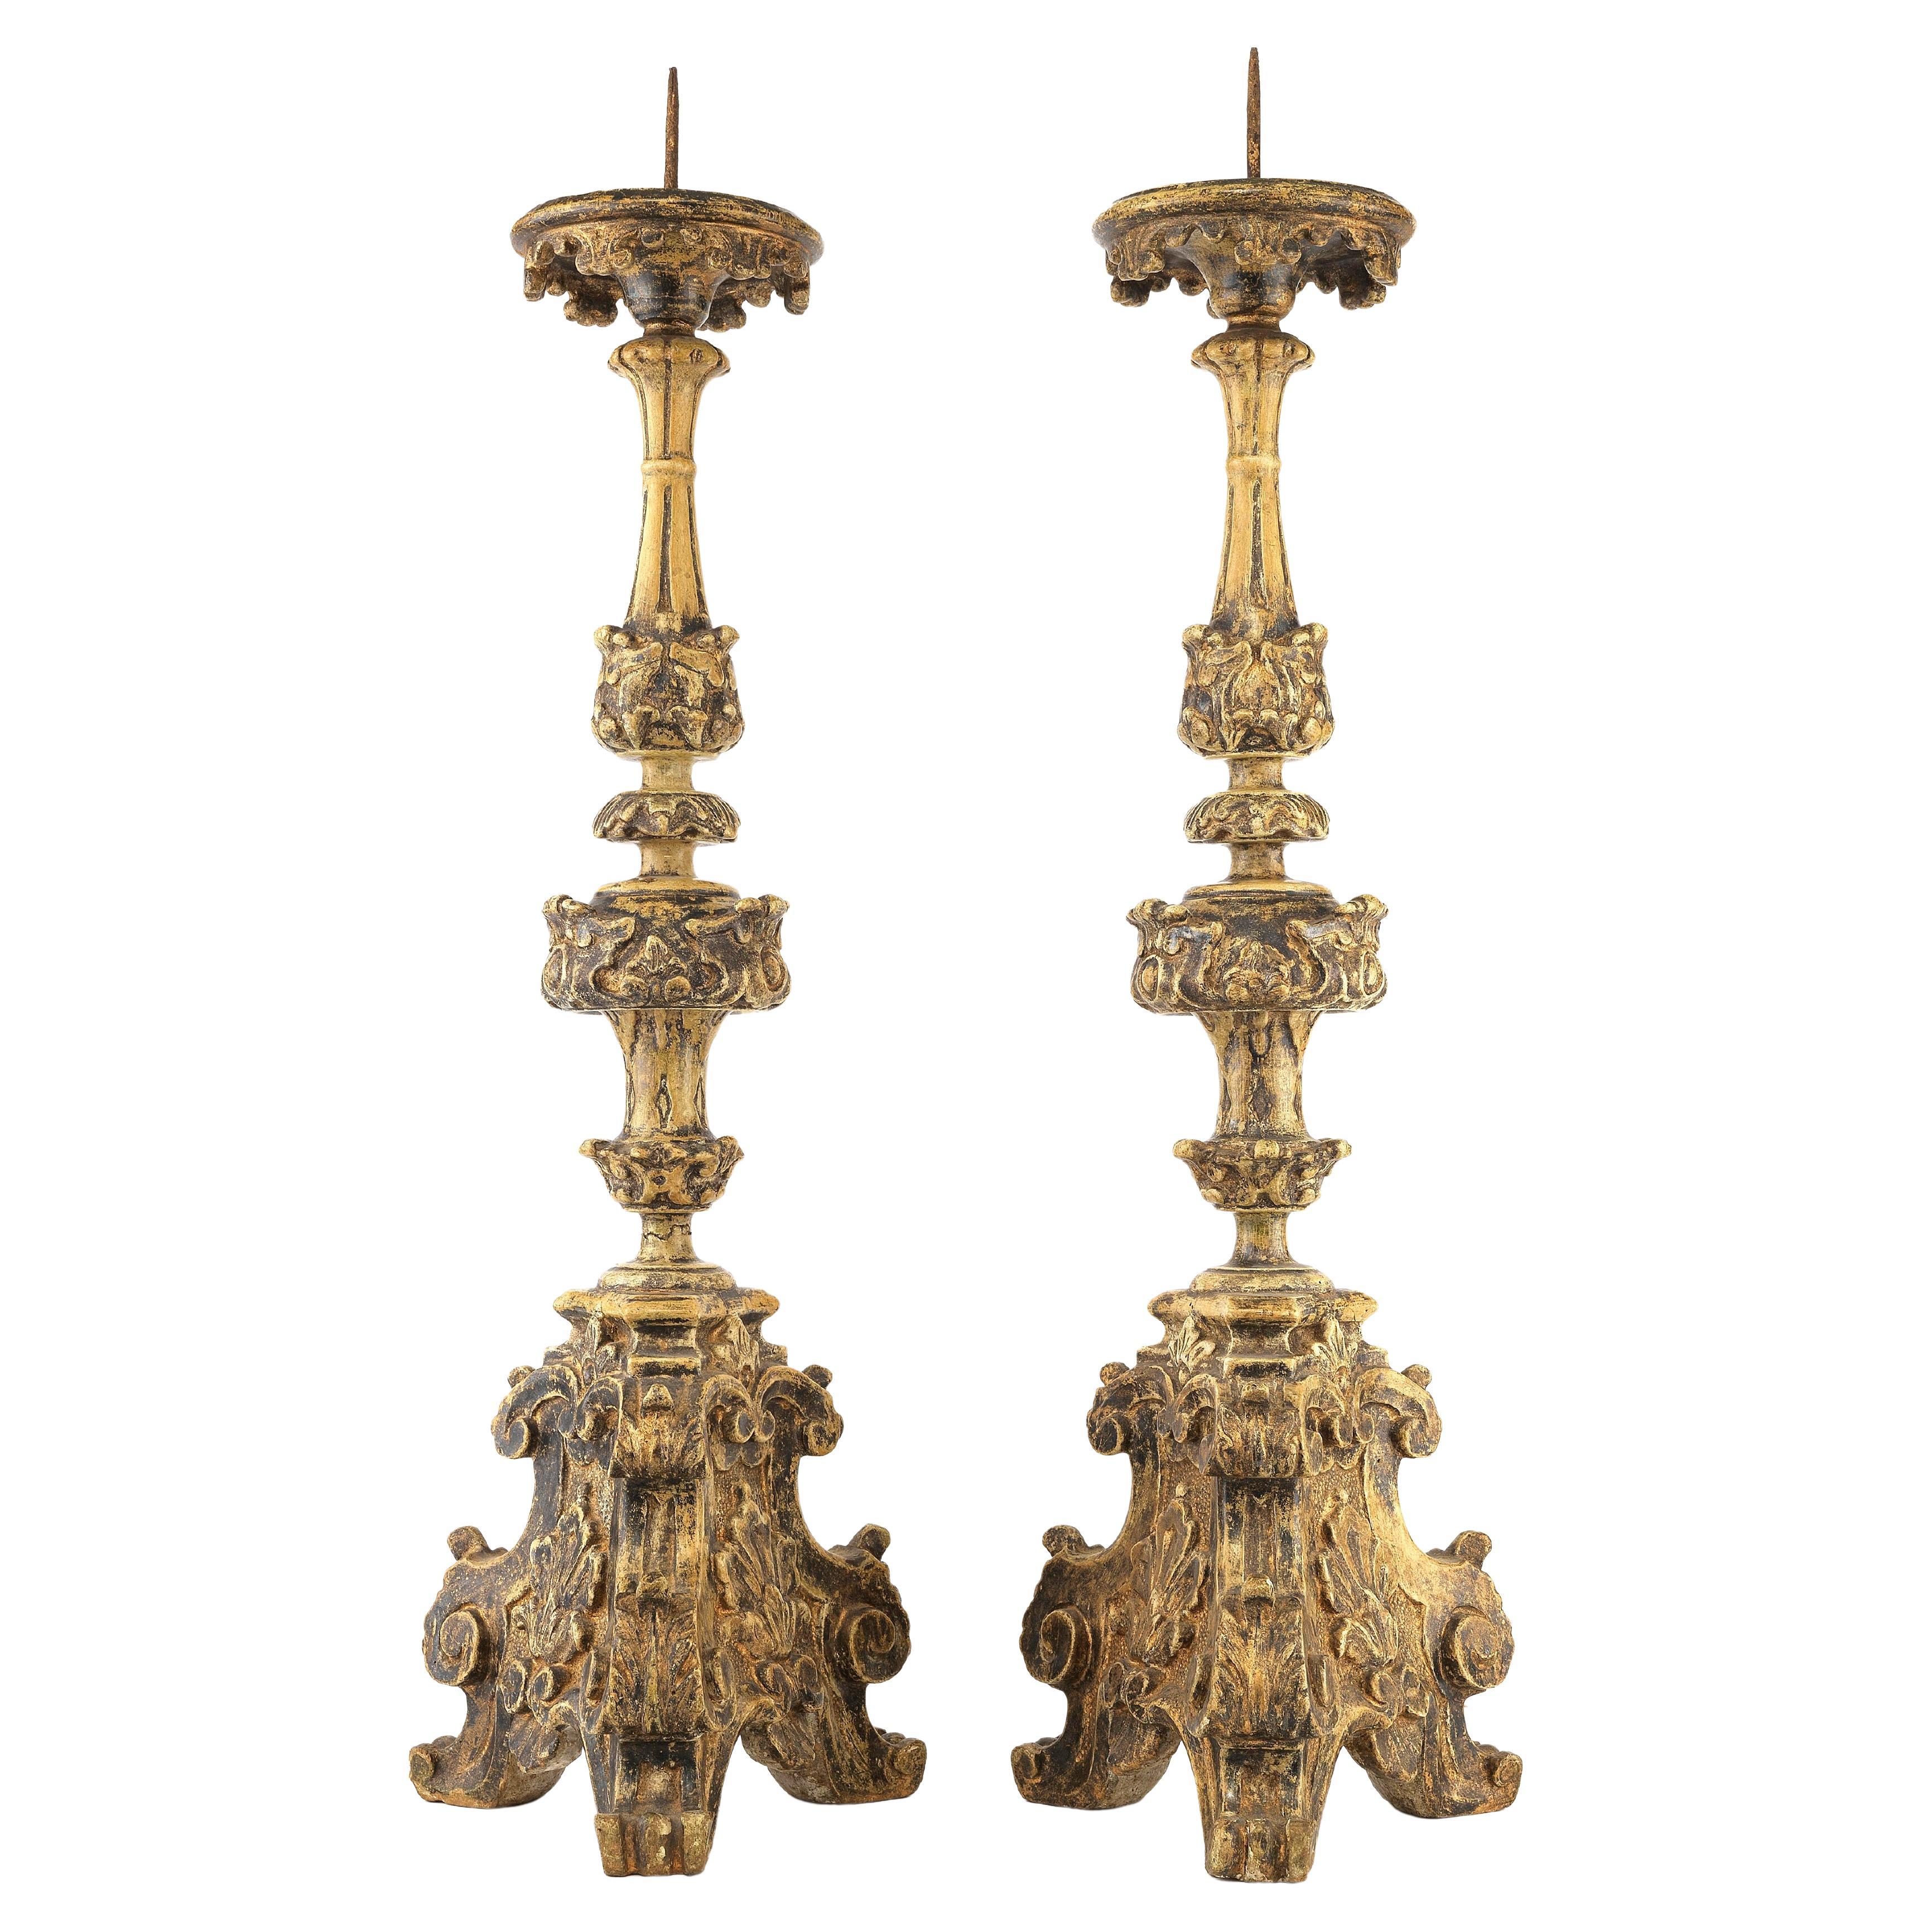 Pair of Early 18th Century Style Plaster and Wood Italian Candelabras For Sale